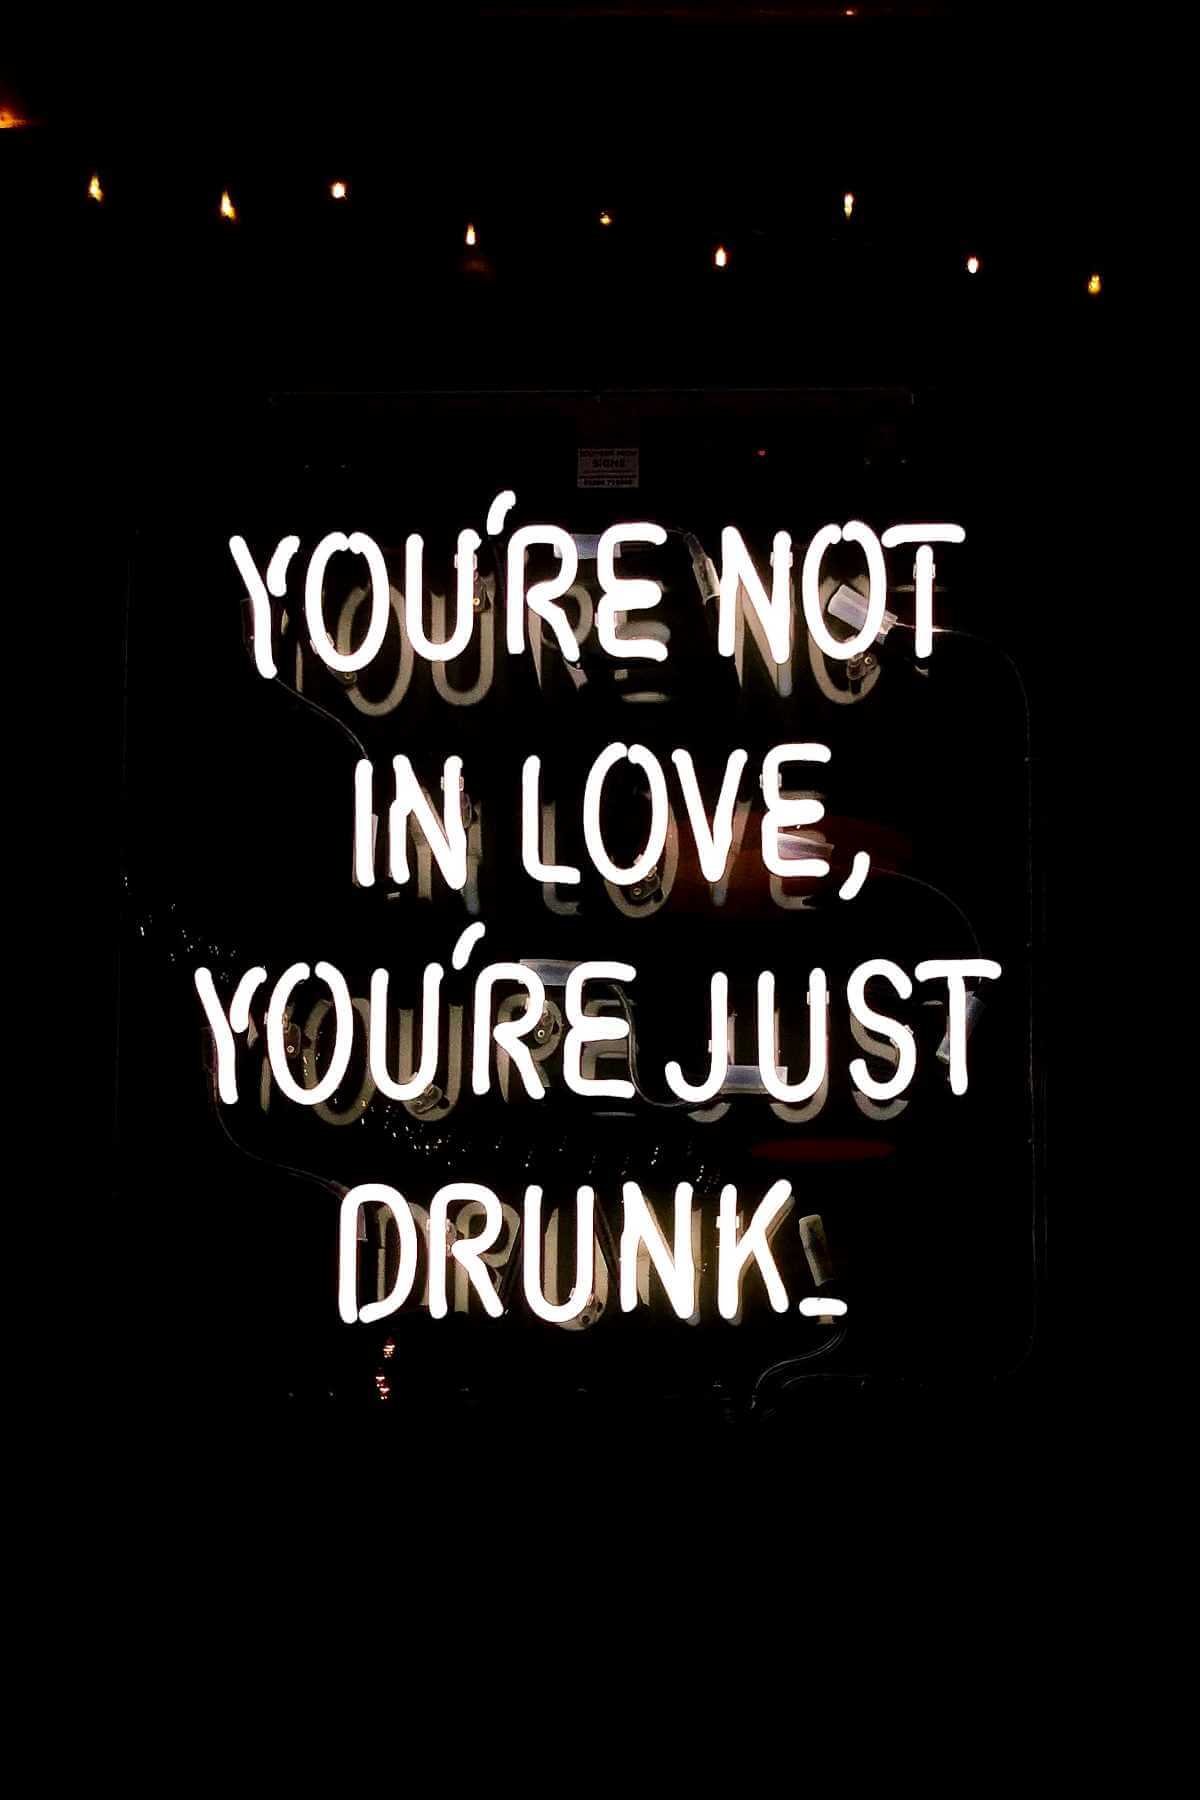 You're not in love, you're just drunk